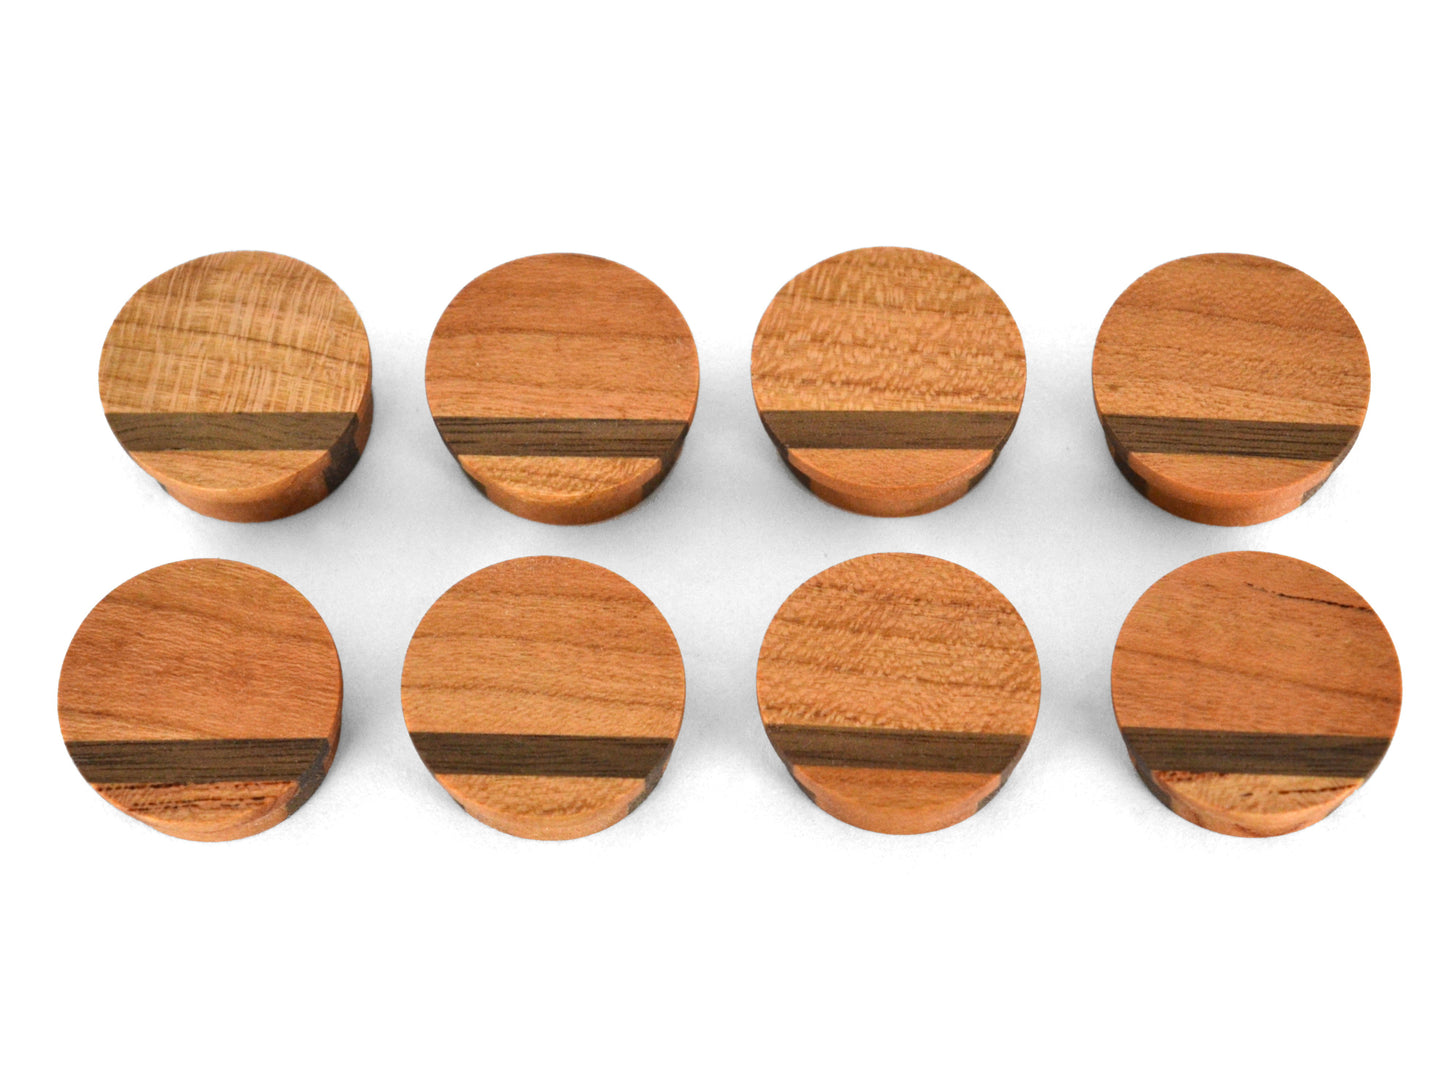 red cherry wood striped neodymium magnets for the fridge